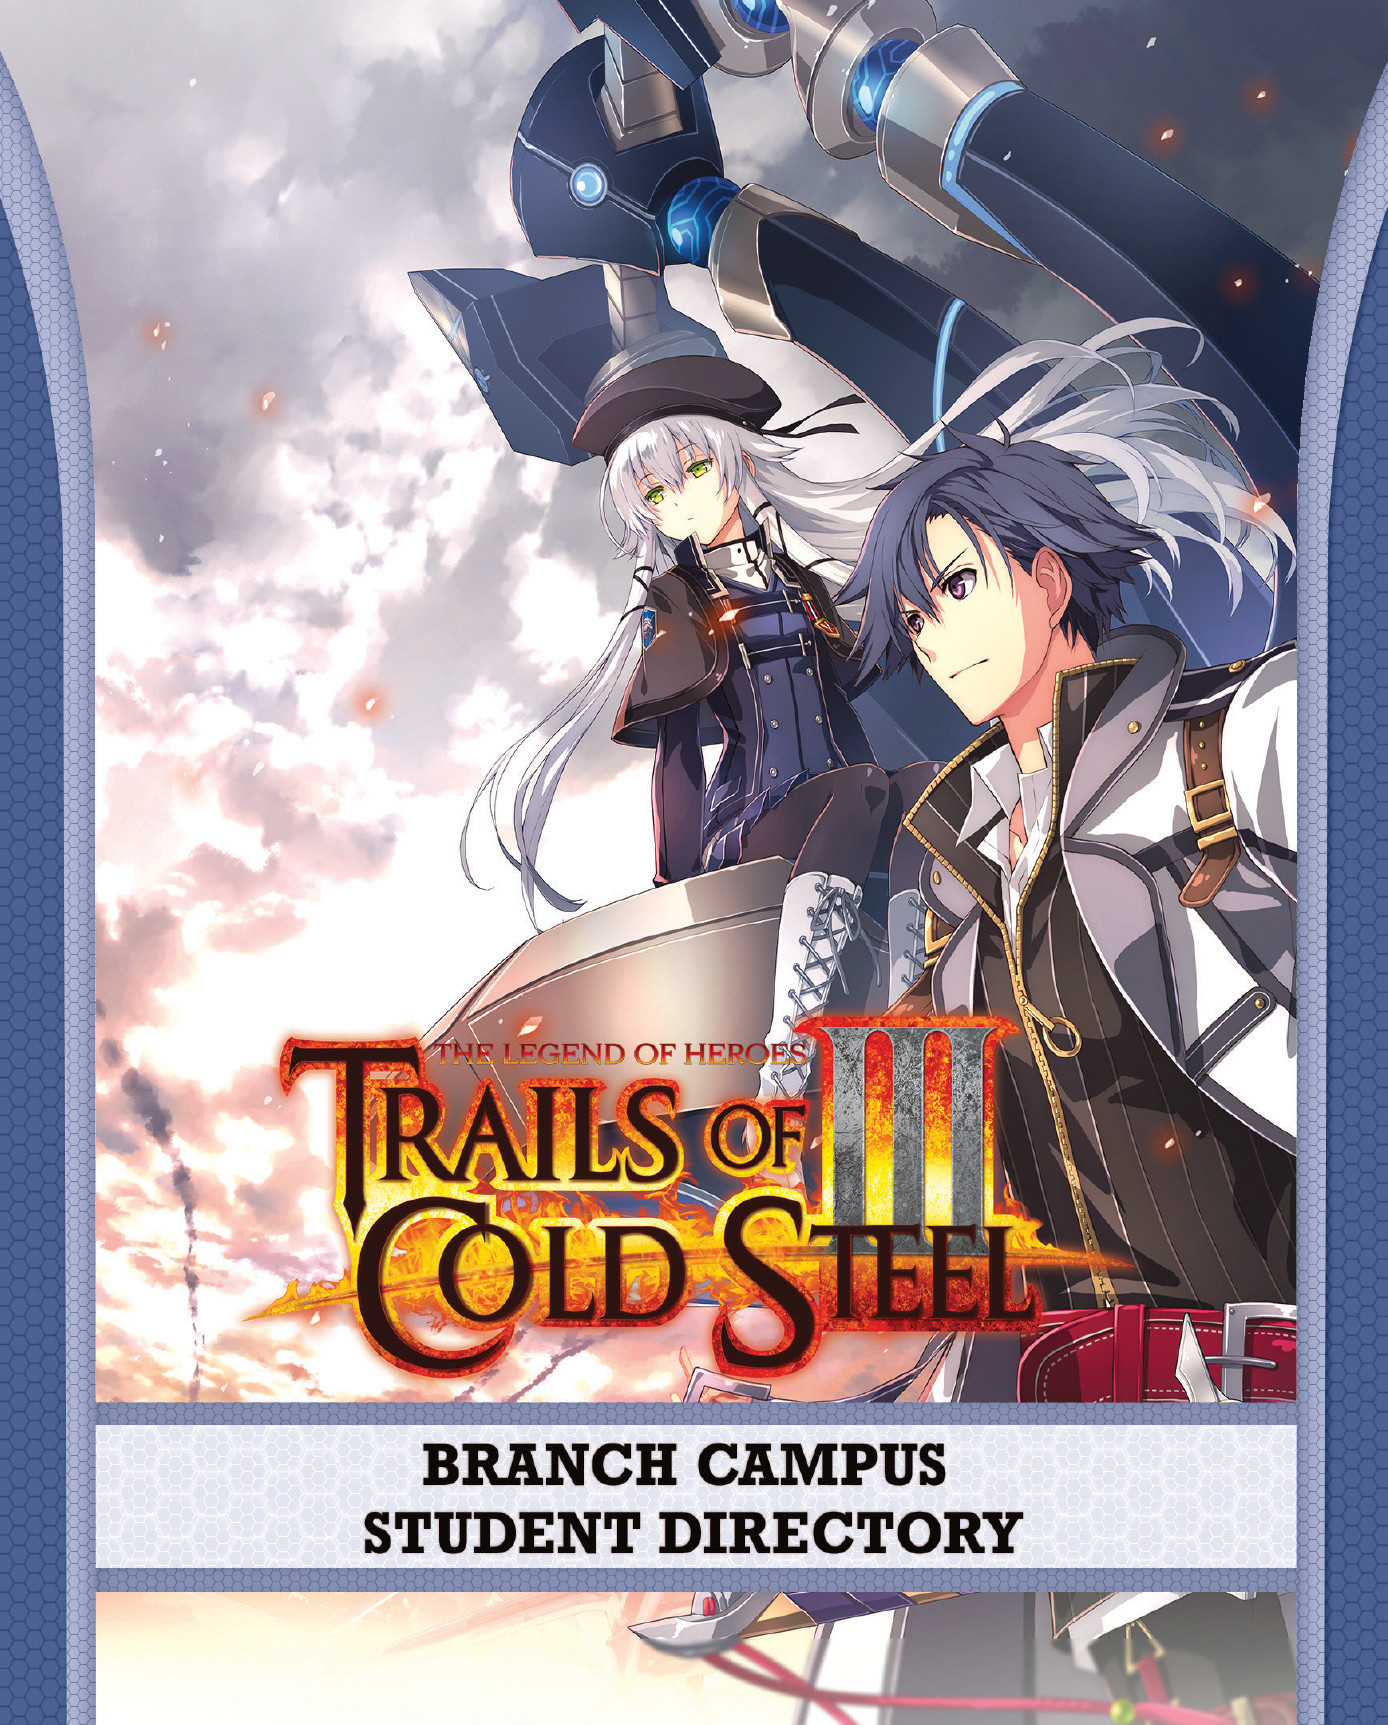 The Legend of Heroes: Trails of Cold Steel III  - Branch Campus Student Directory Digital Mini Art Book screenshot